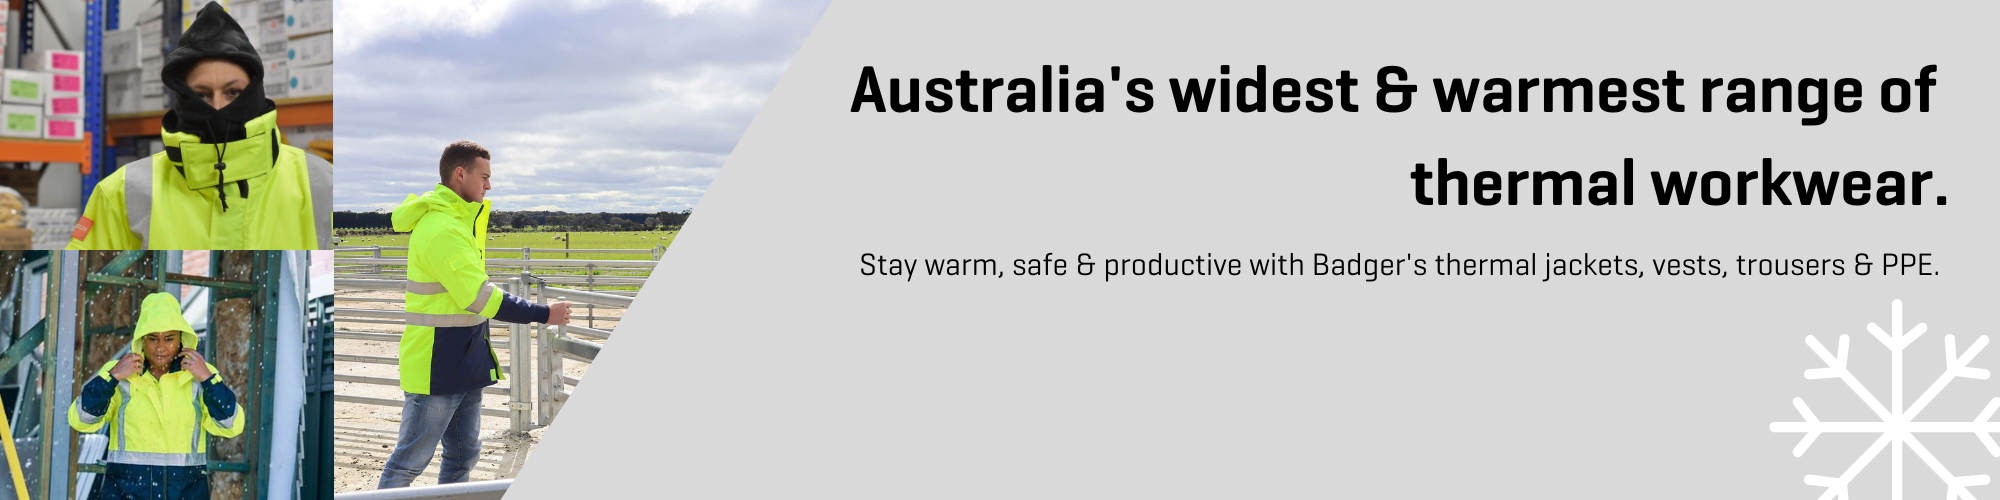 Winter Workwear View Australia’s widest & warmest range of thermal workwear. Stay warm, safe & productive with Badger’s thermal jackets, vests & trousers.